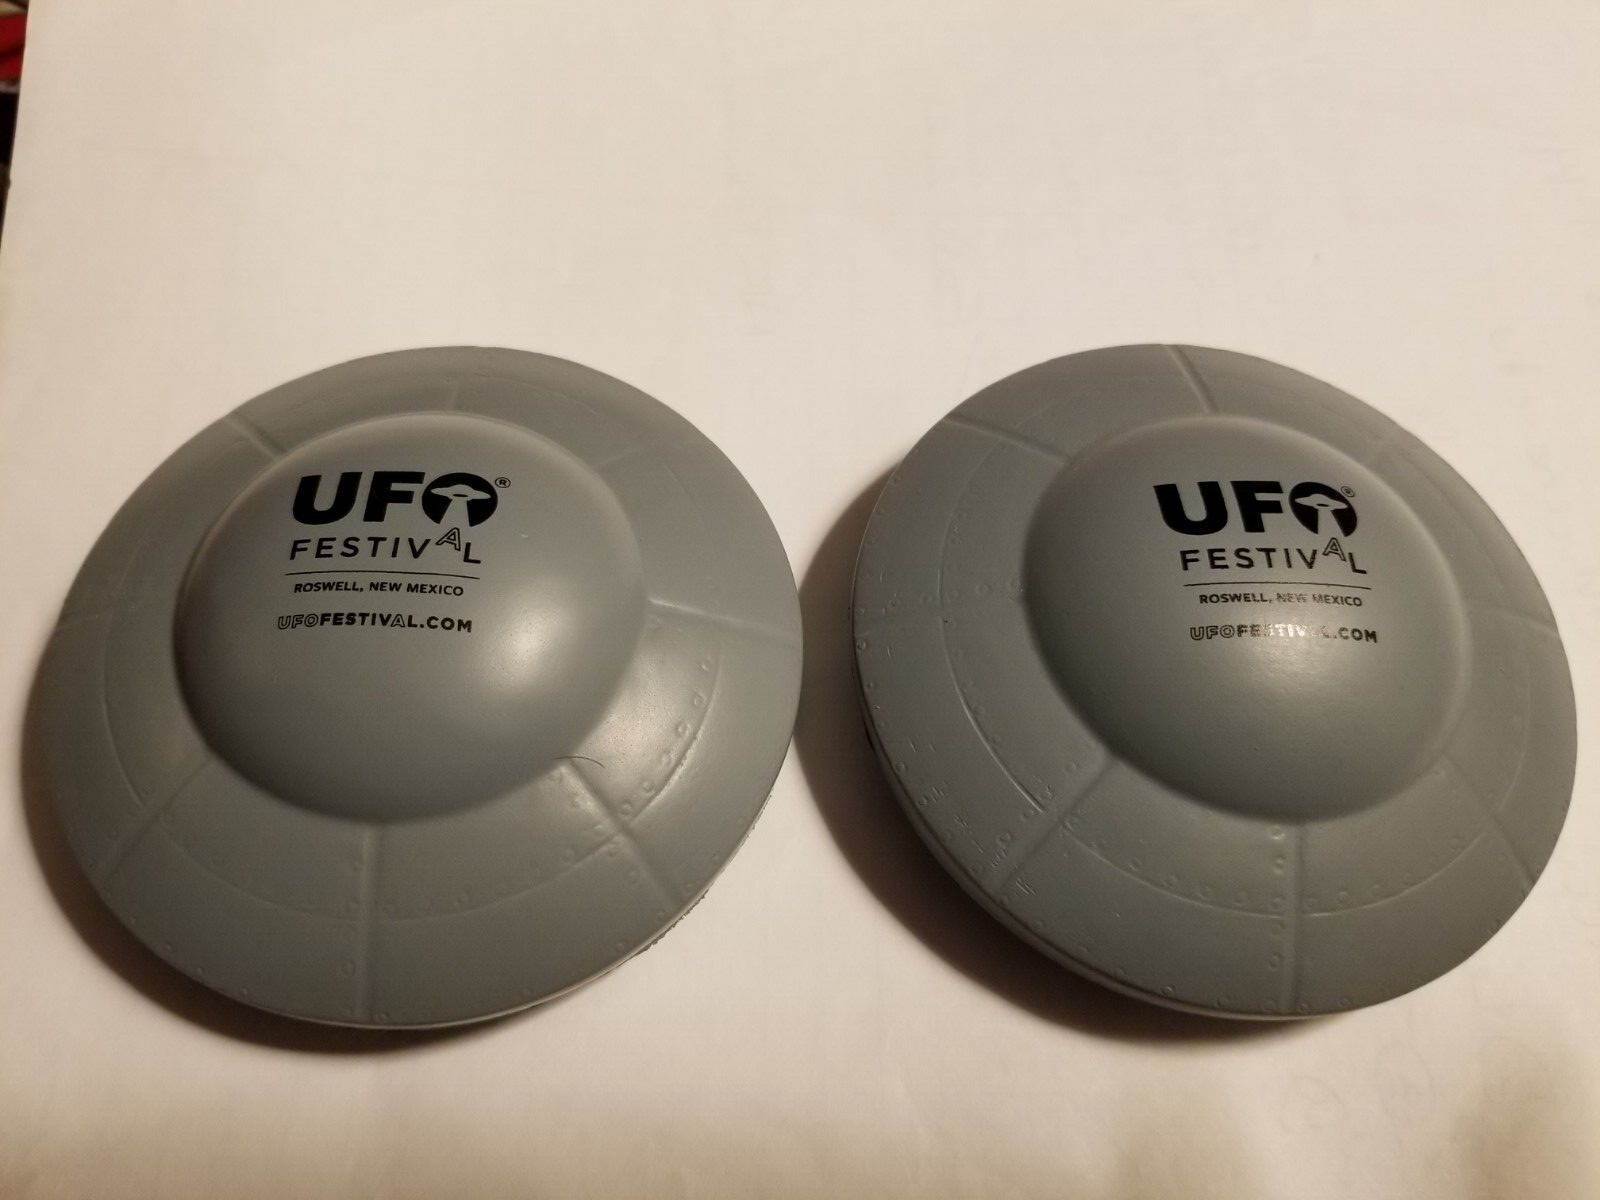 UFO Roswell, New Mexico UFO Festival Spaceships Stress Relief Toys - 2 New! Roswell